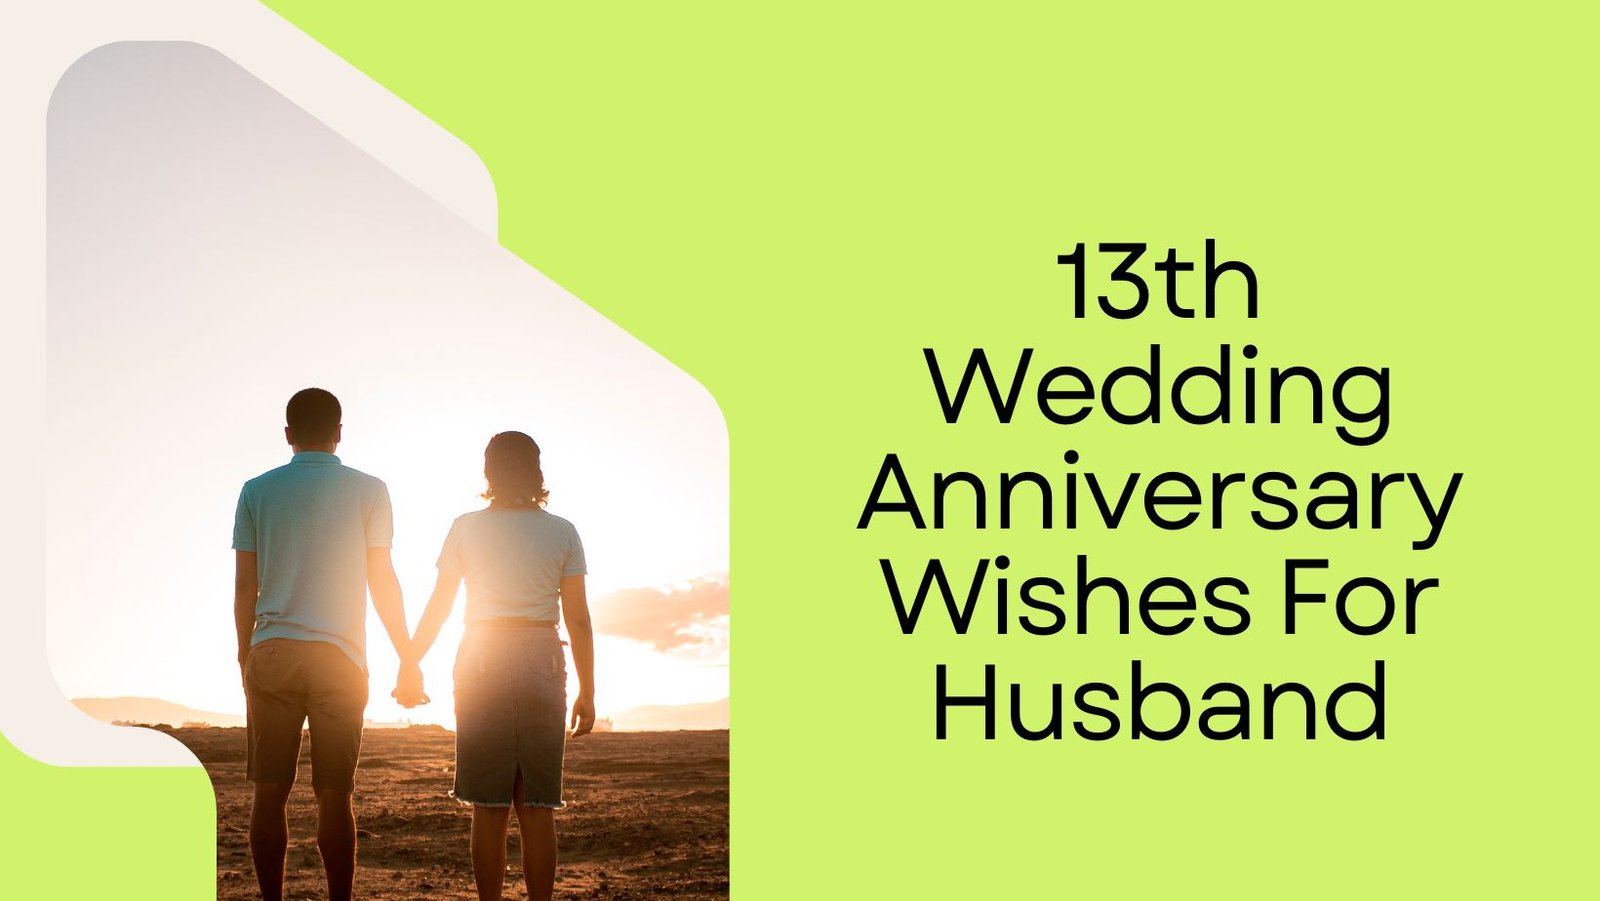 13th Wedding Anniversary Wishes For Husband